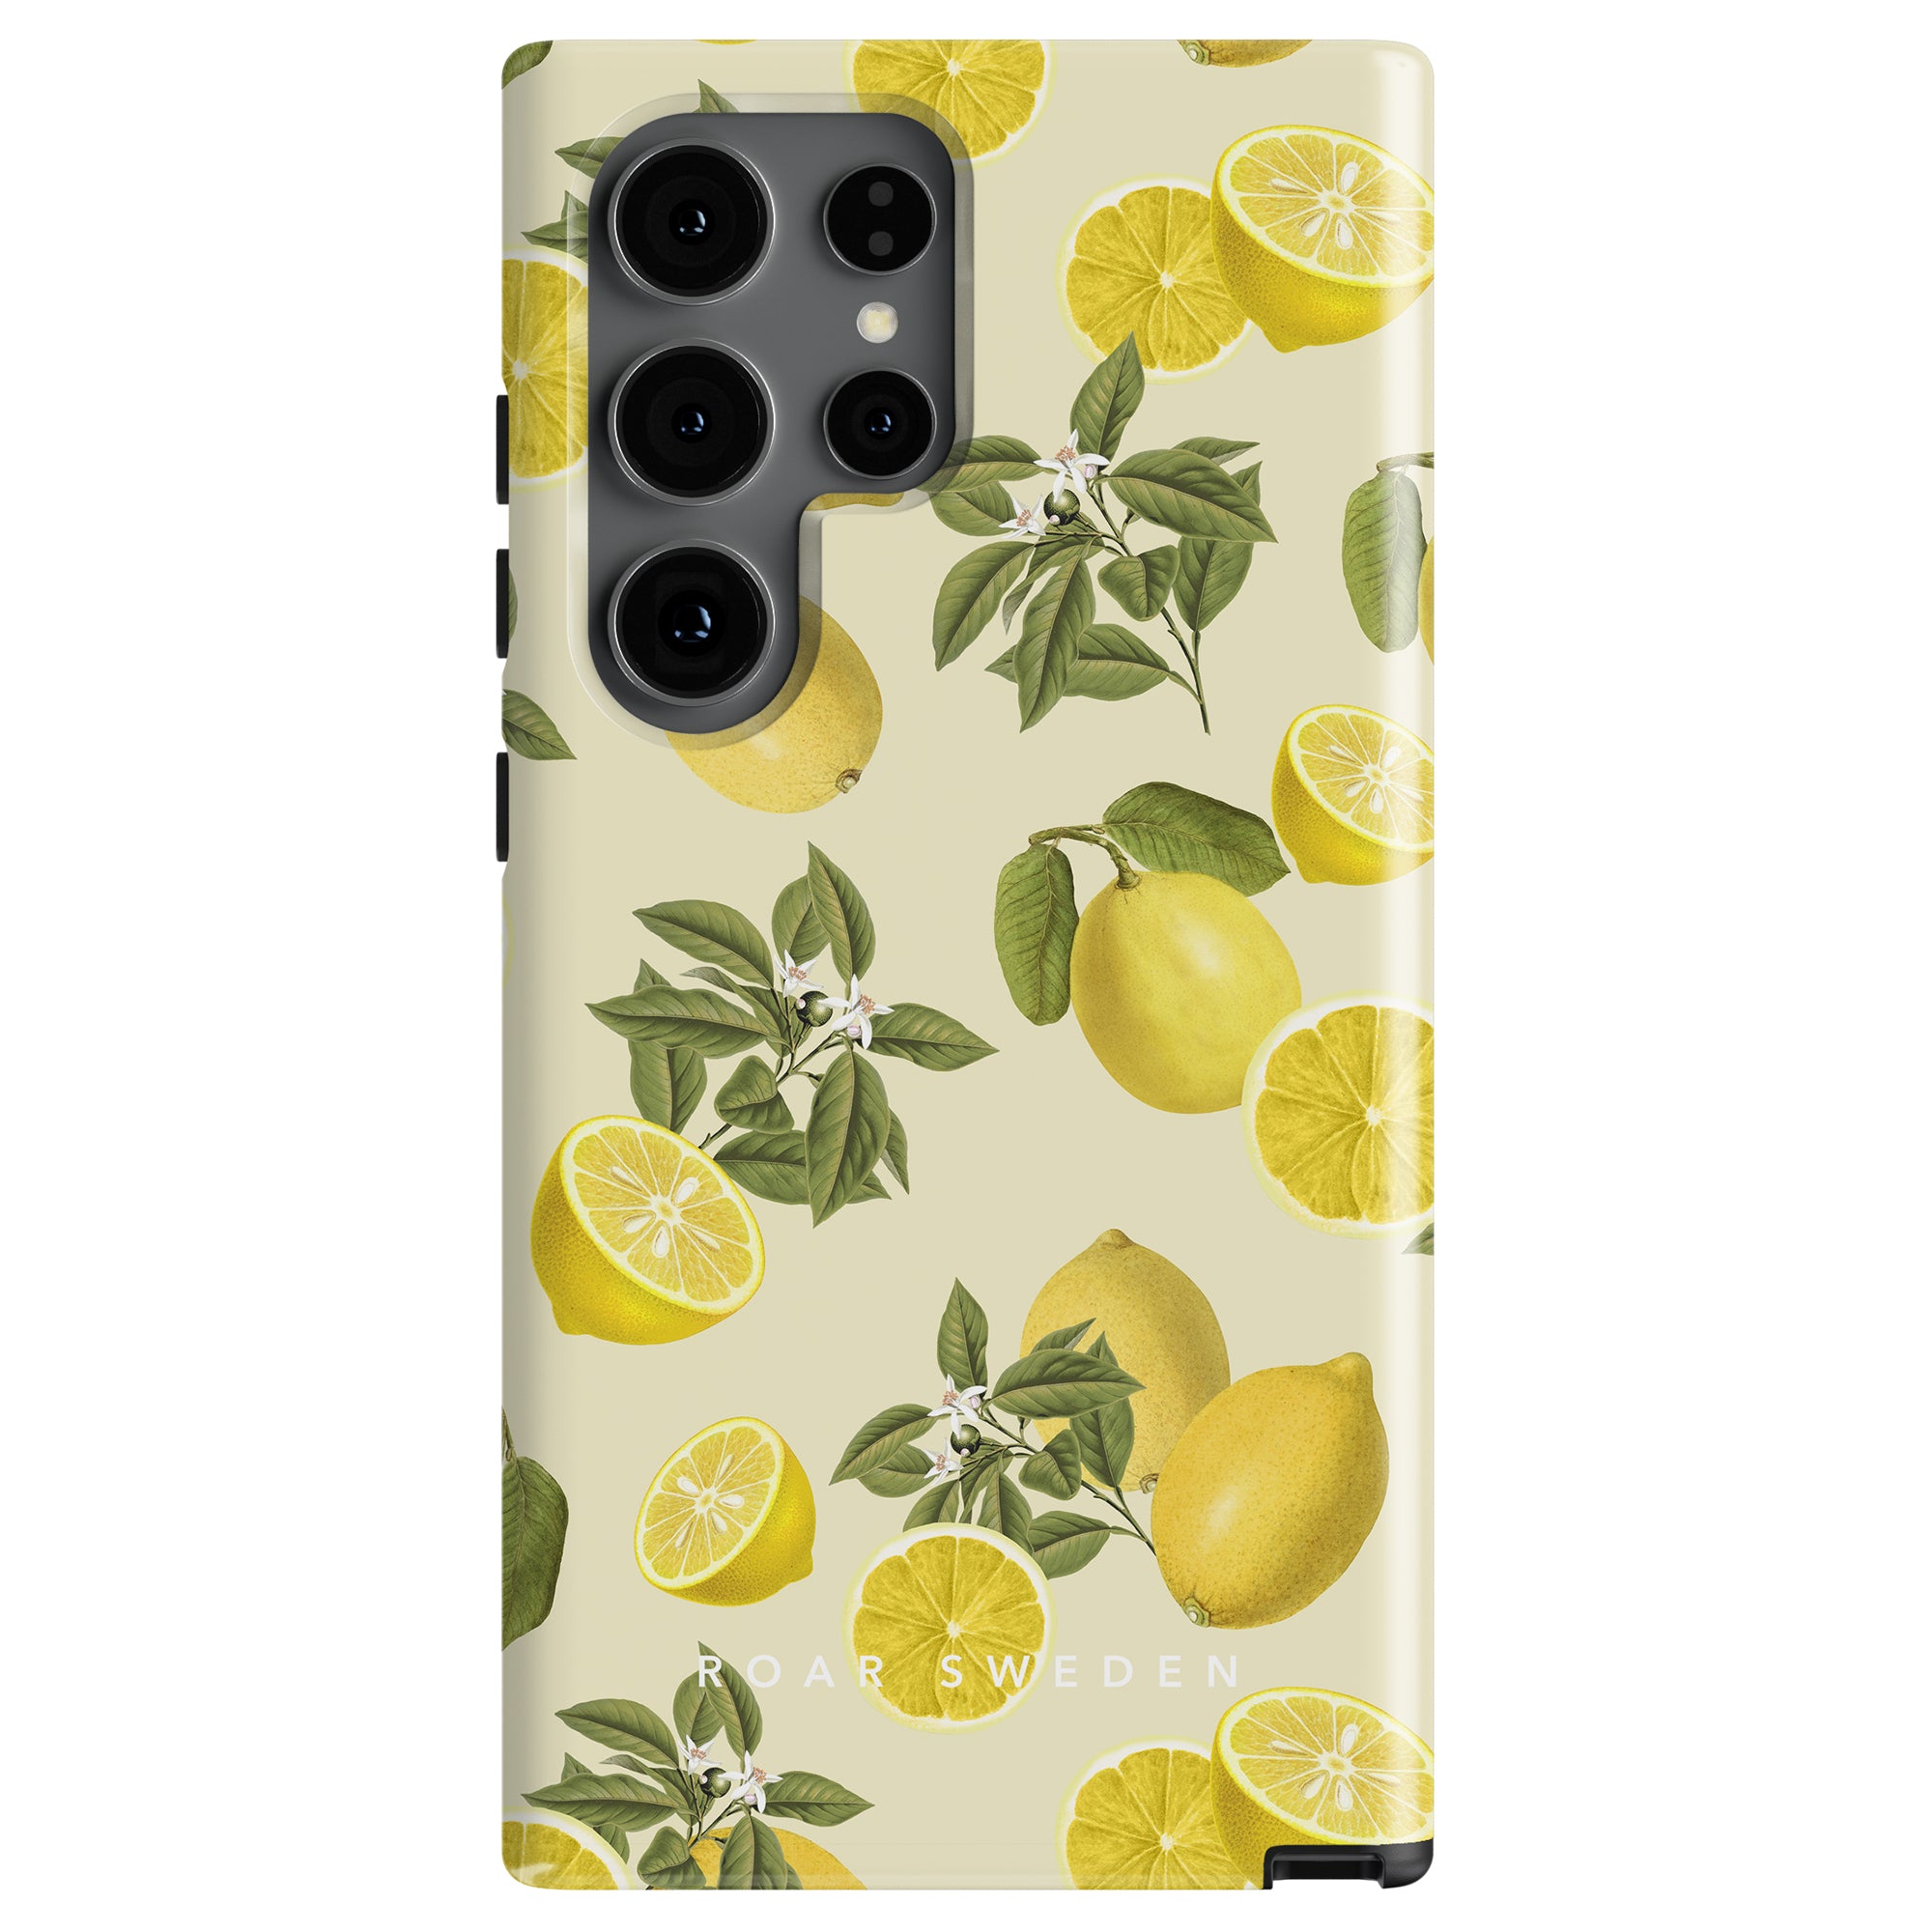 A Limon tough case with a yellow background featuring an Italienska citronskal and leaf pattern, designed for a phone with four cameras.